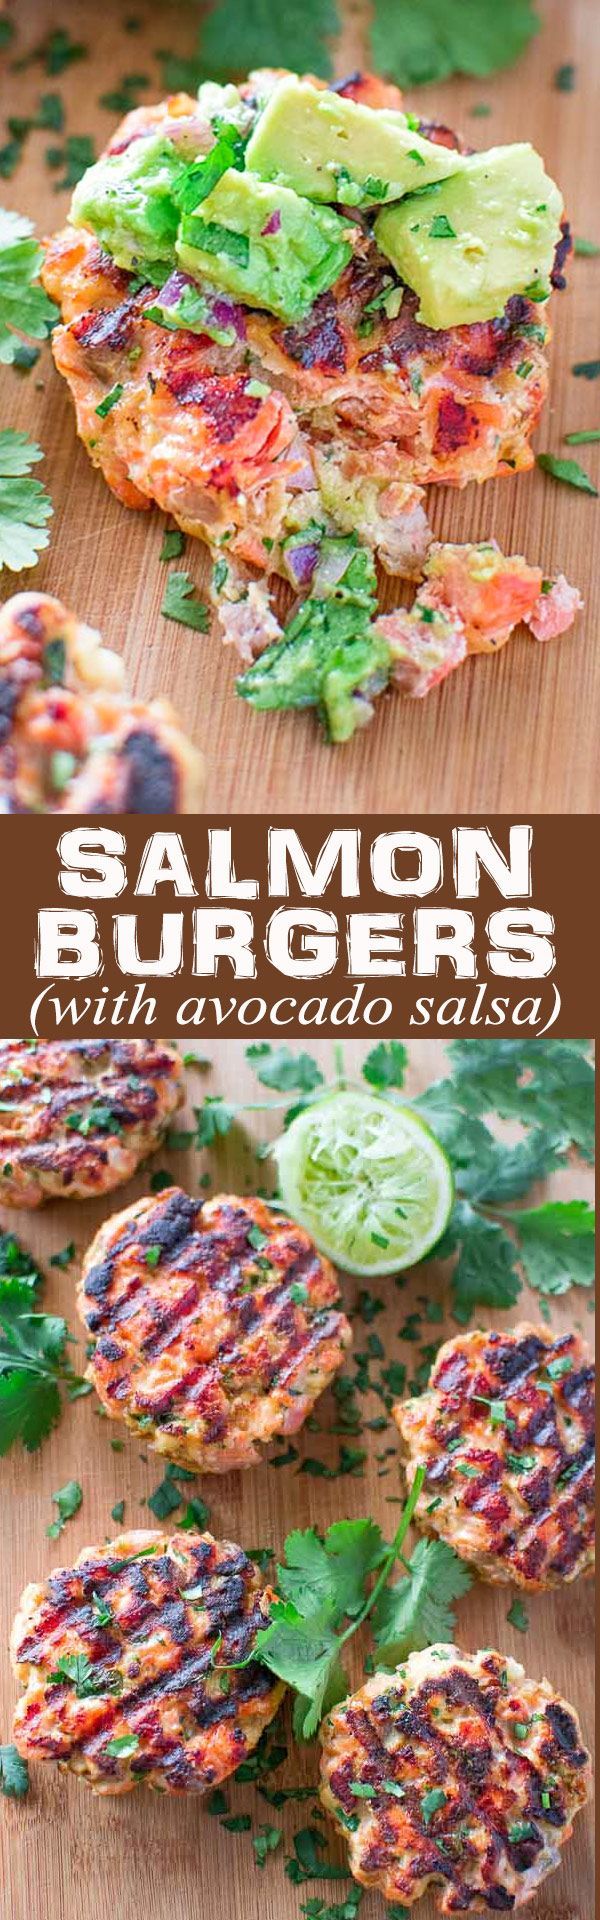 Tasty, healthy and easy to make this Salmon Burger recipe is unavoidable! Serving